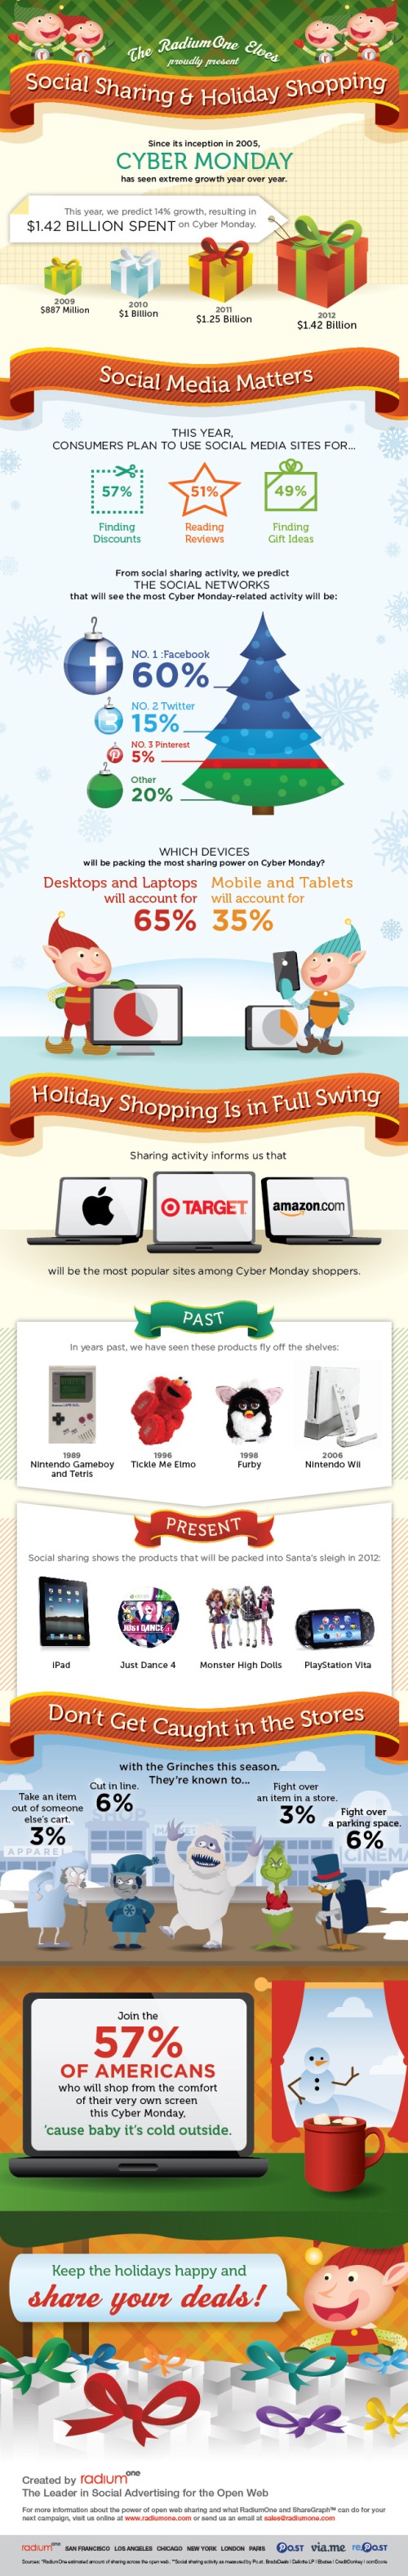 Cyber Monday Infographic 2012